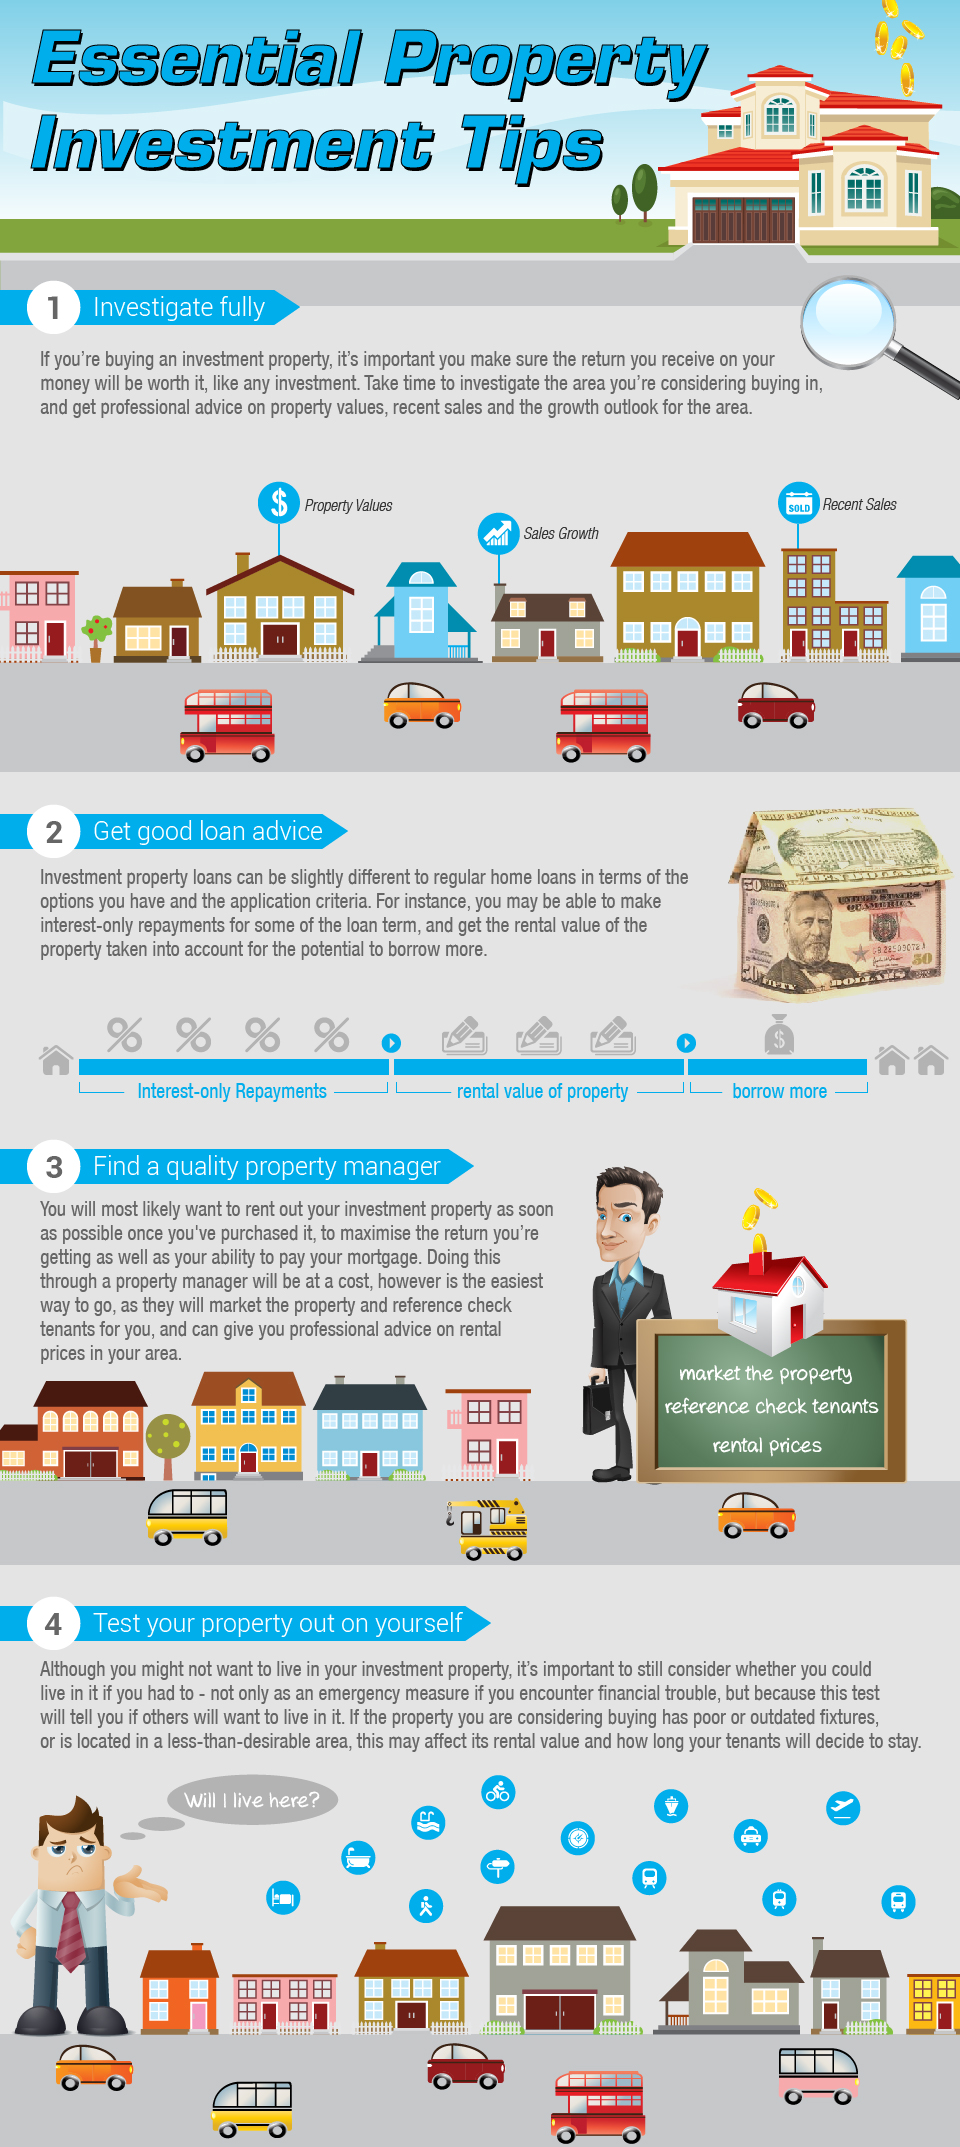 Essential Property Investment Tips [Infographic]